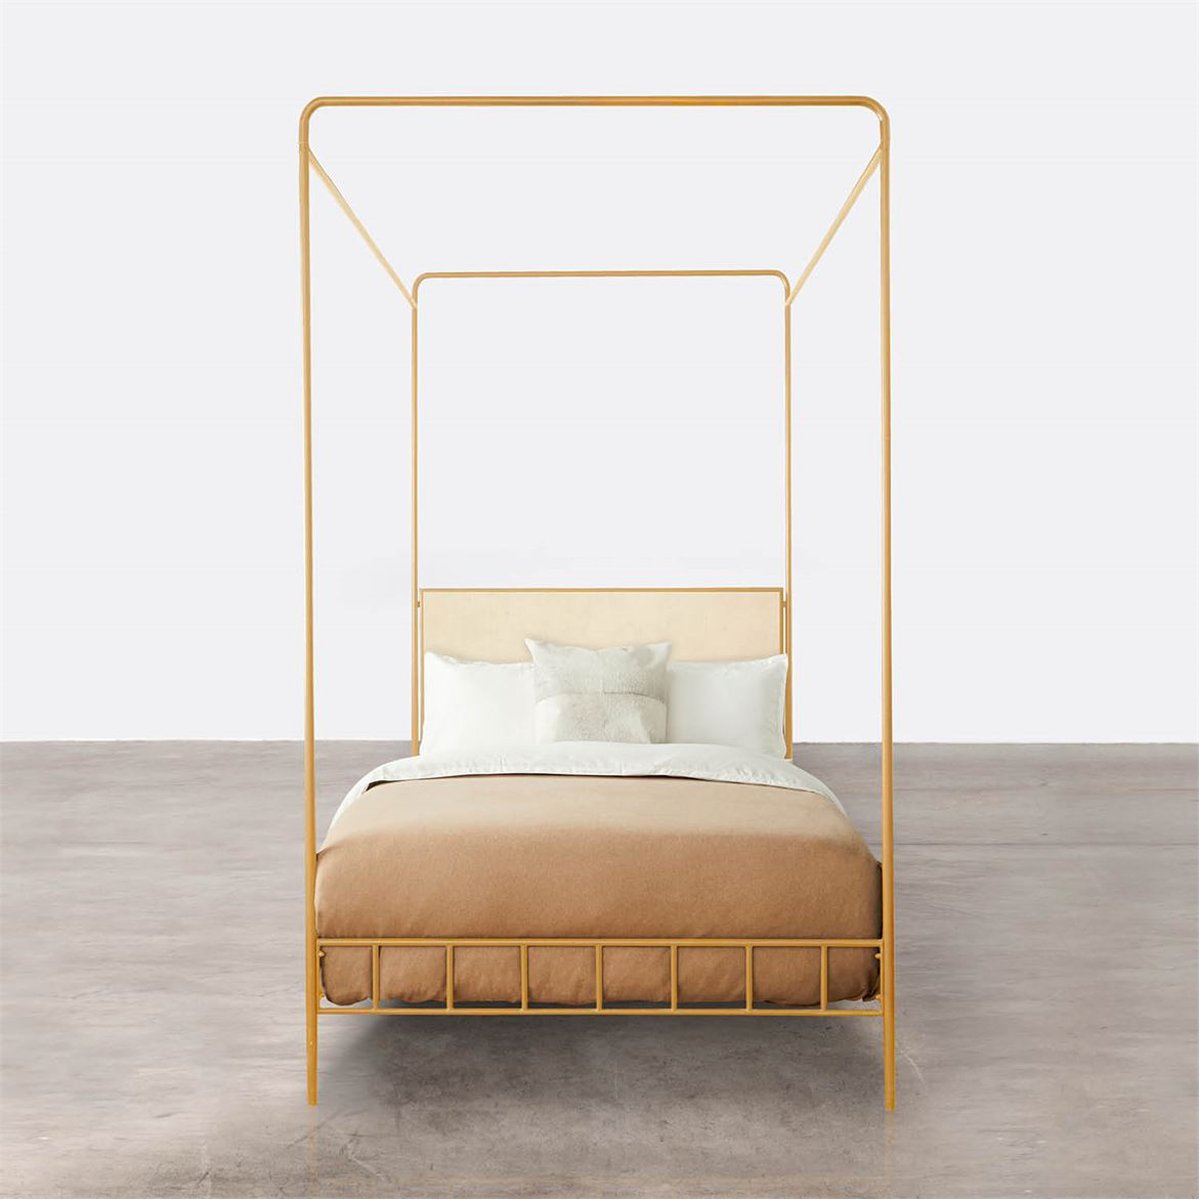 Made Goods Laken Iron Canopy Bed in Garonne Leather